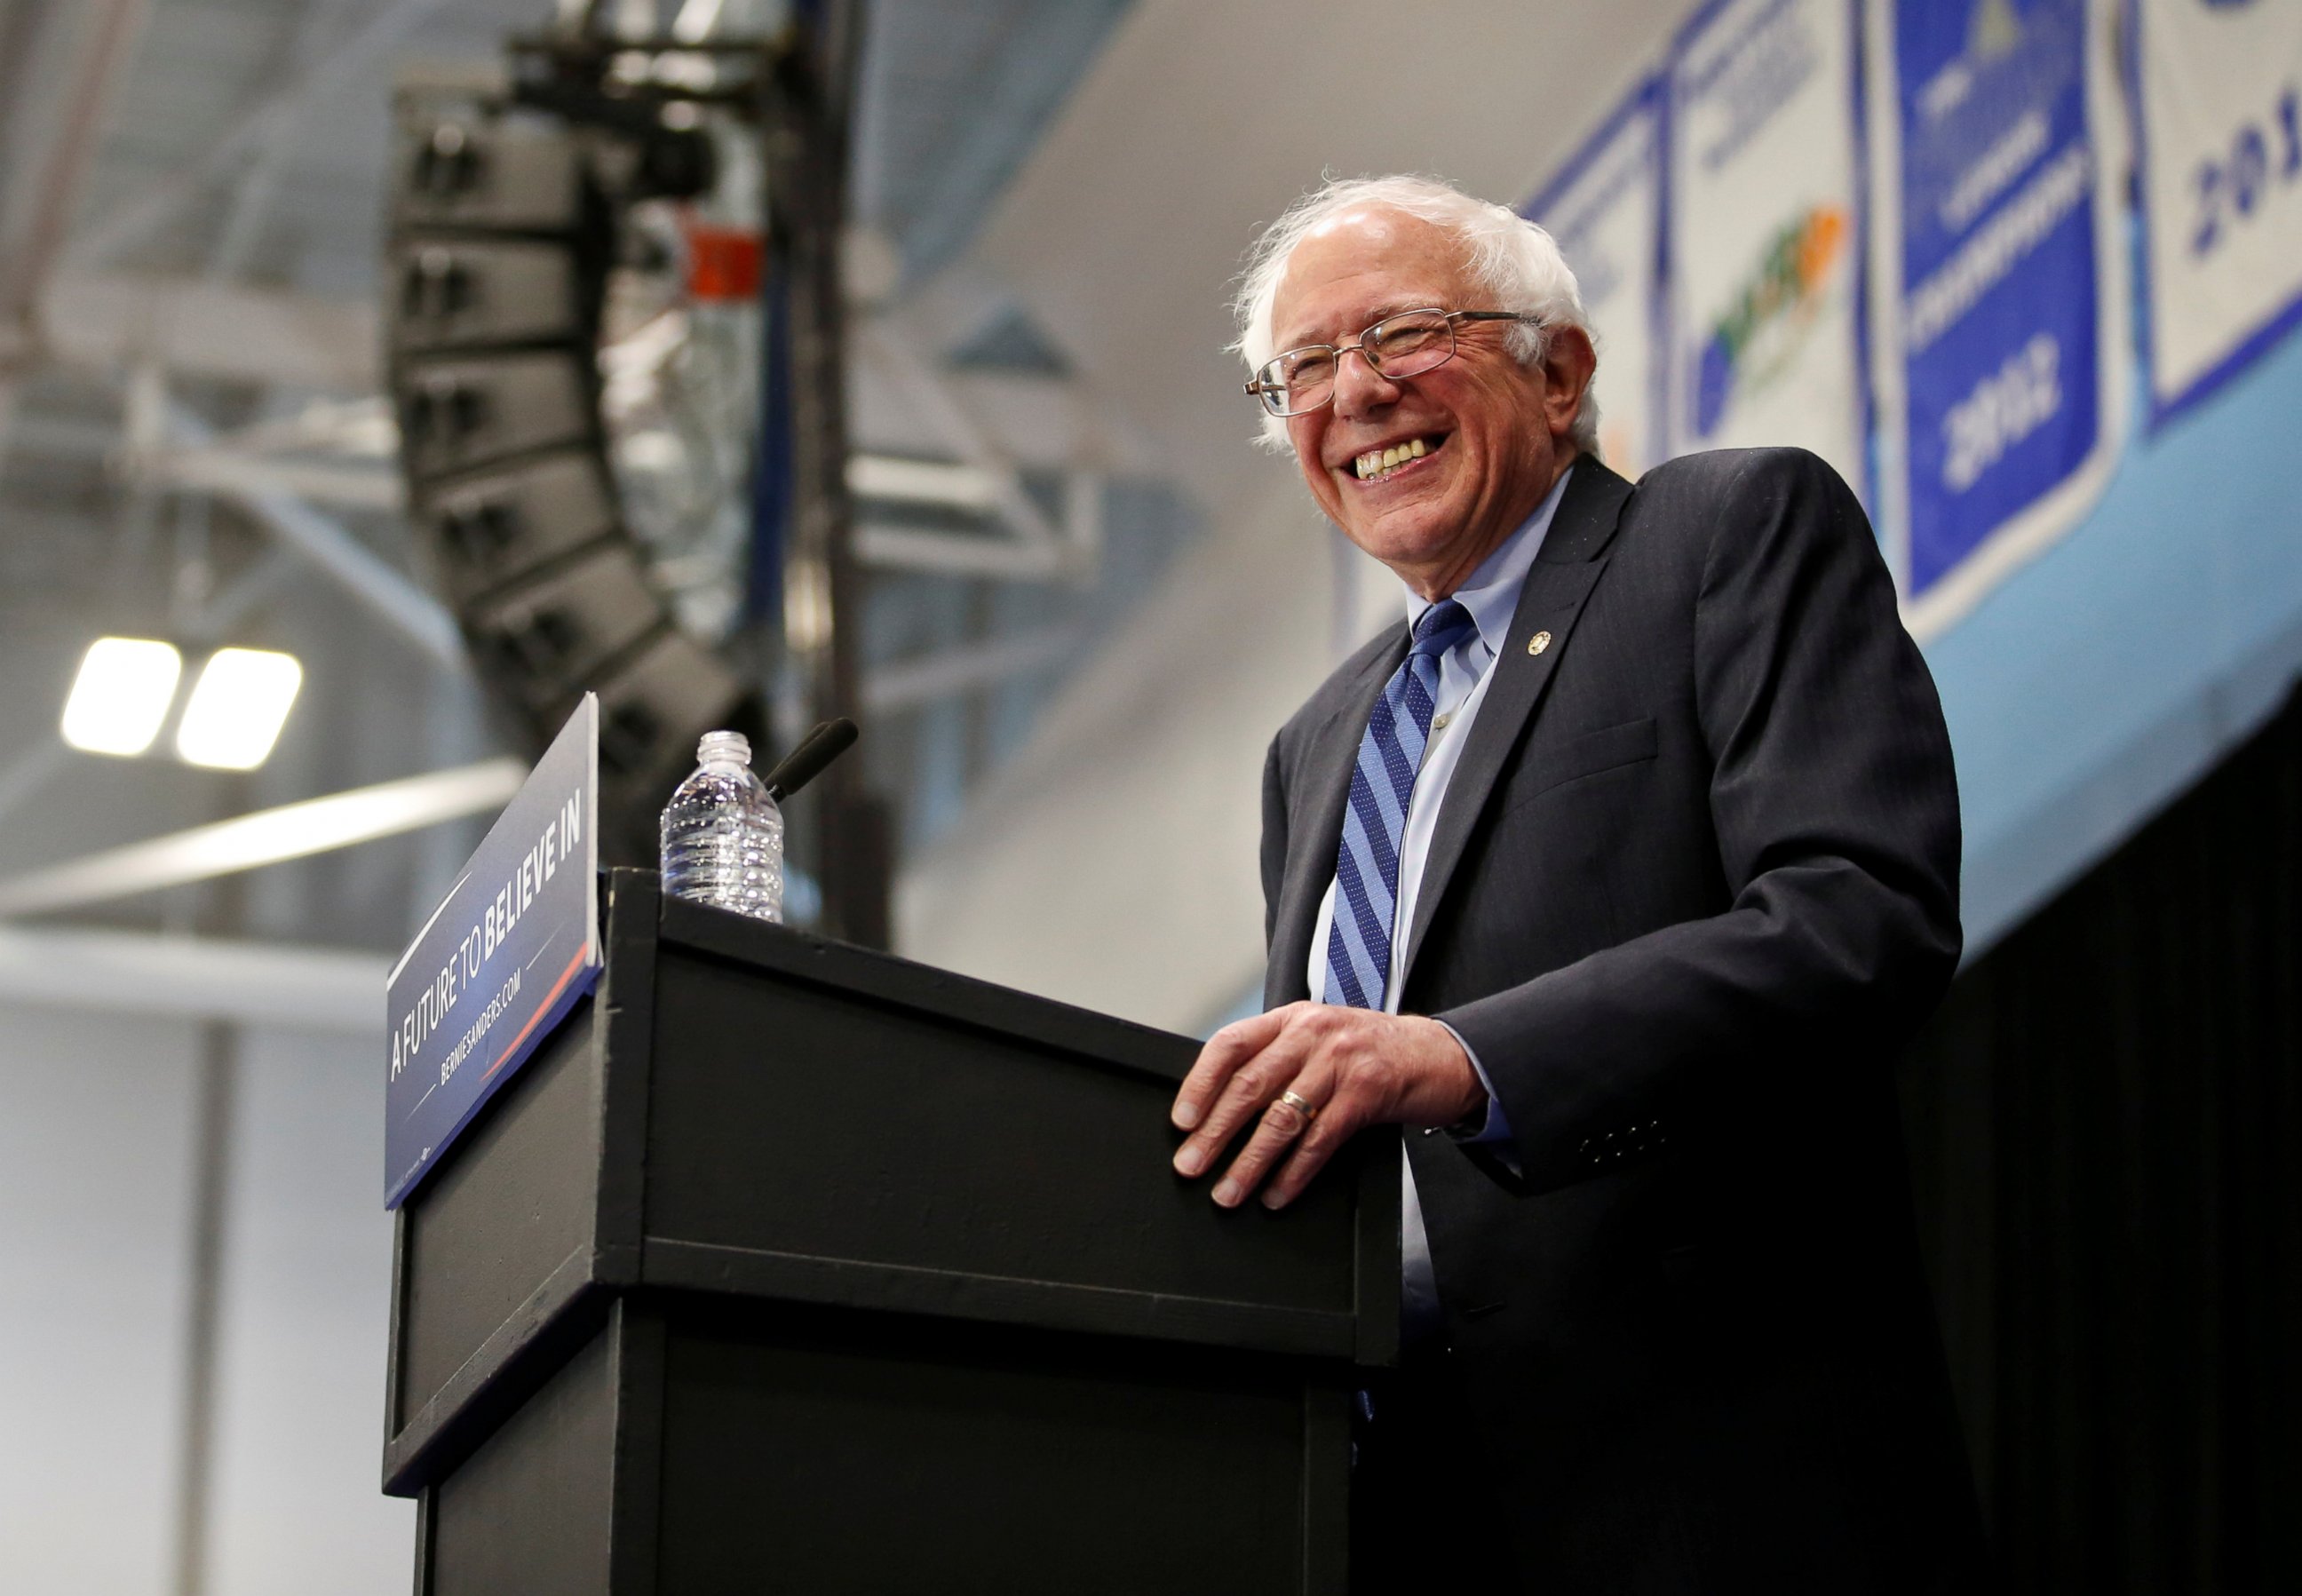 PHOTO: Democratic presidential candidate Bernie Sanders, I-VT, smiles during a campaign rally at the Indiana University-Purdue University Fort Wayne in Fort Wayne, Ind., May 2, 2016. 